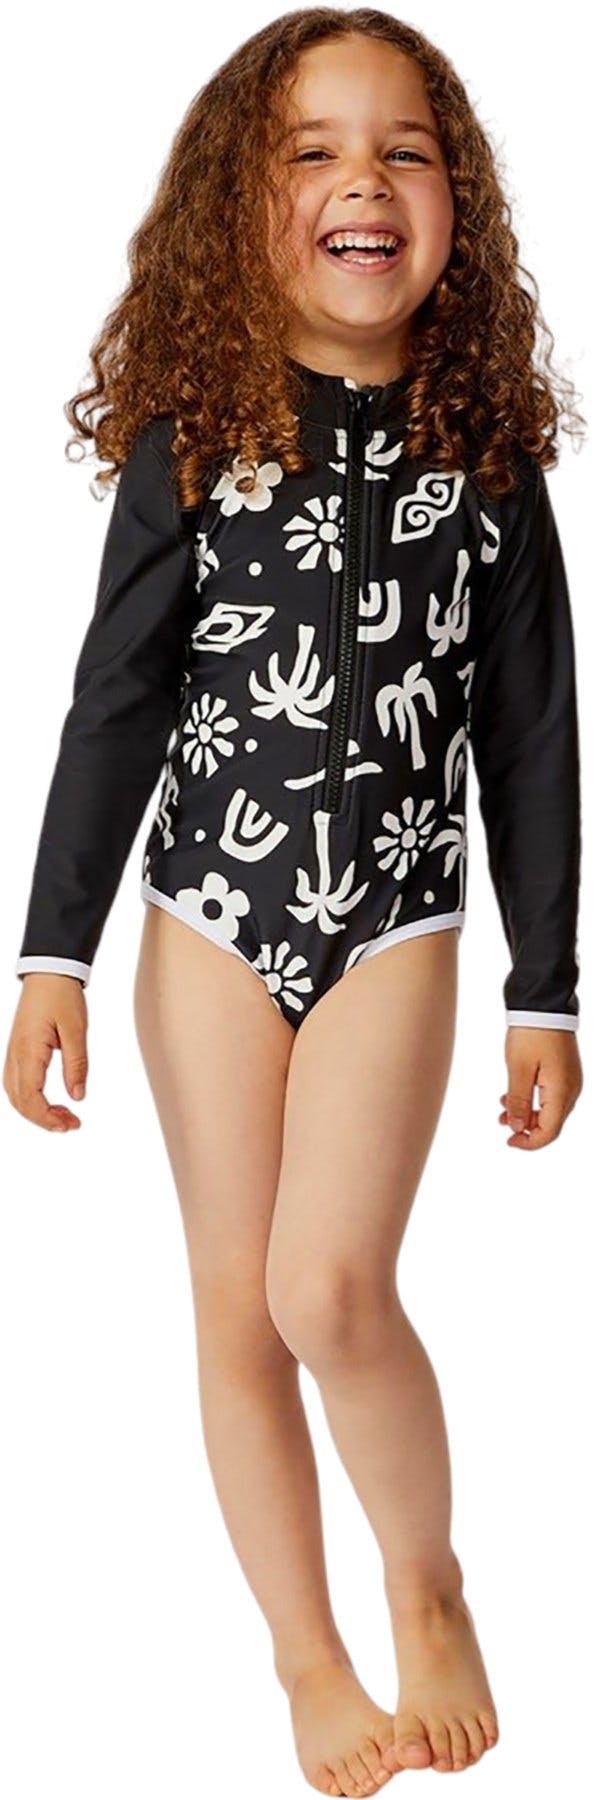 Product image for Low Tide Long Sleeve Surf Suit - Girls